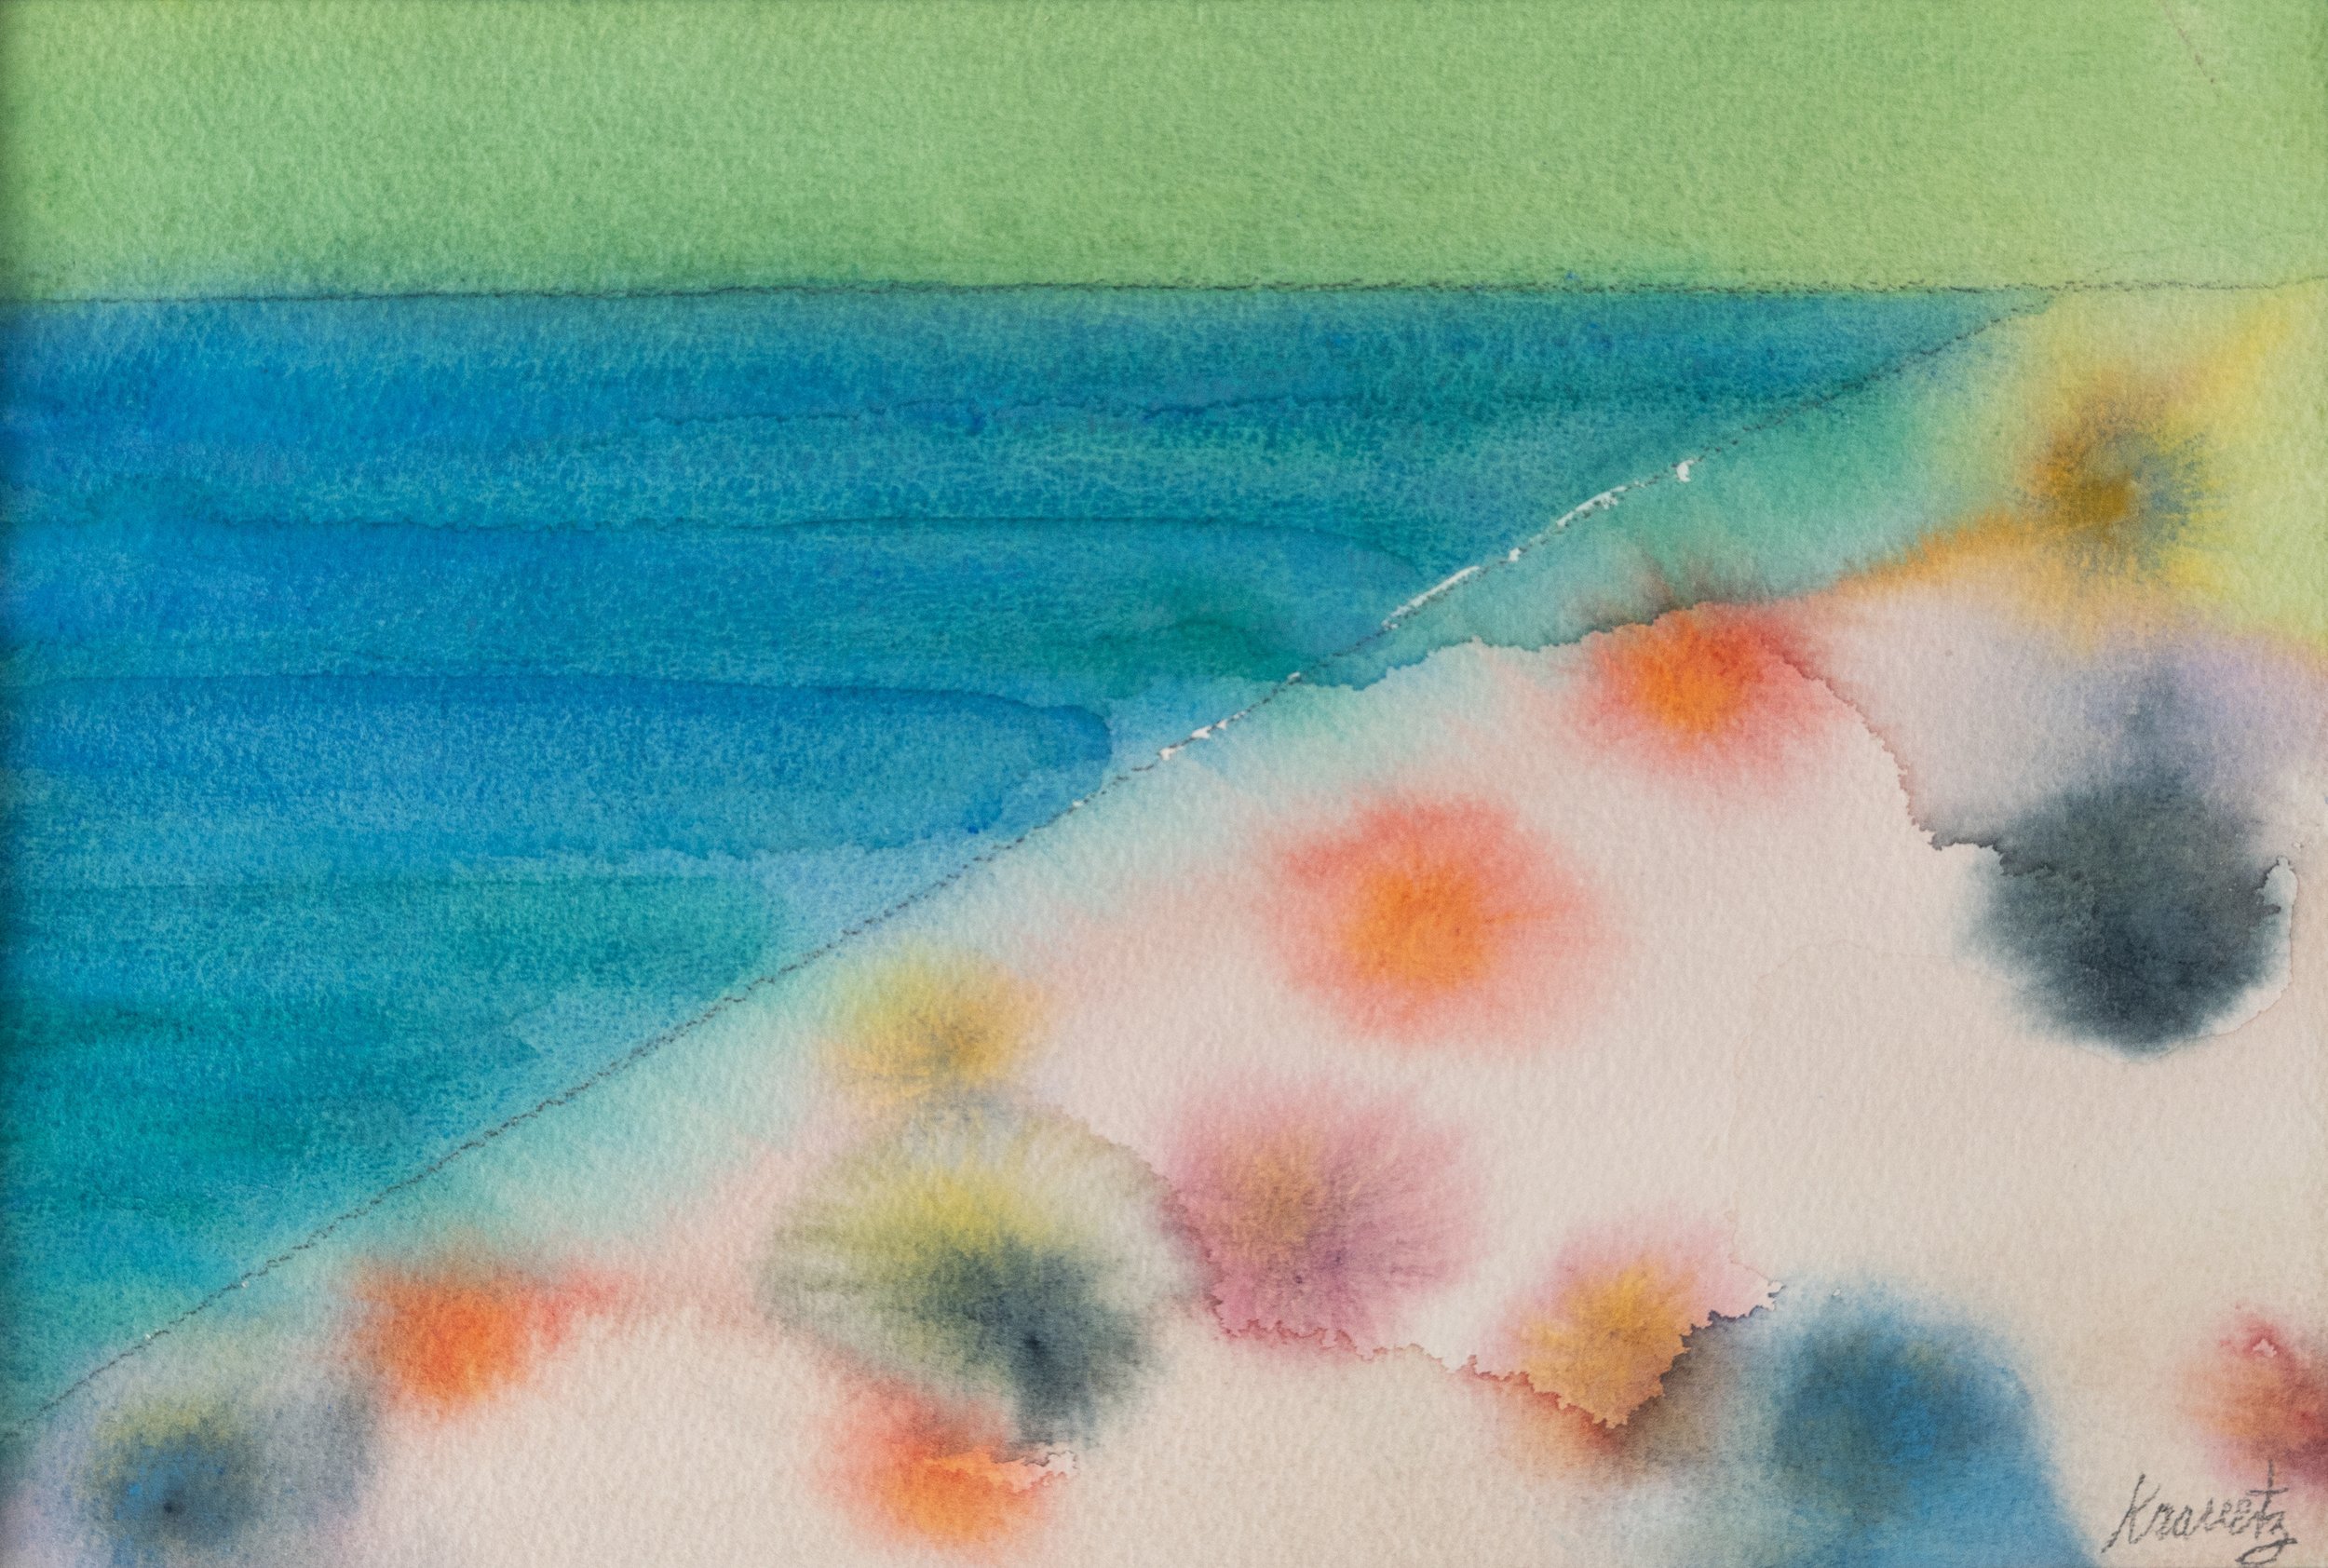 Jewels of the Sea, 1989, watercolor, 14x16 inches with mat